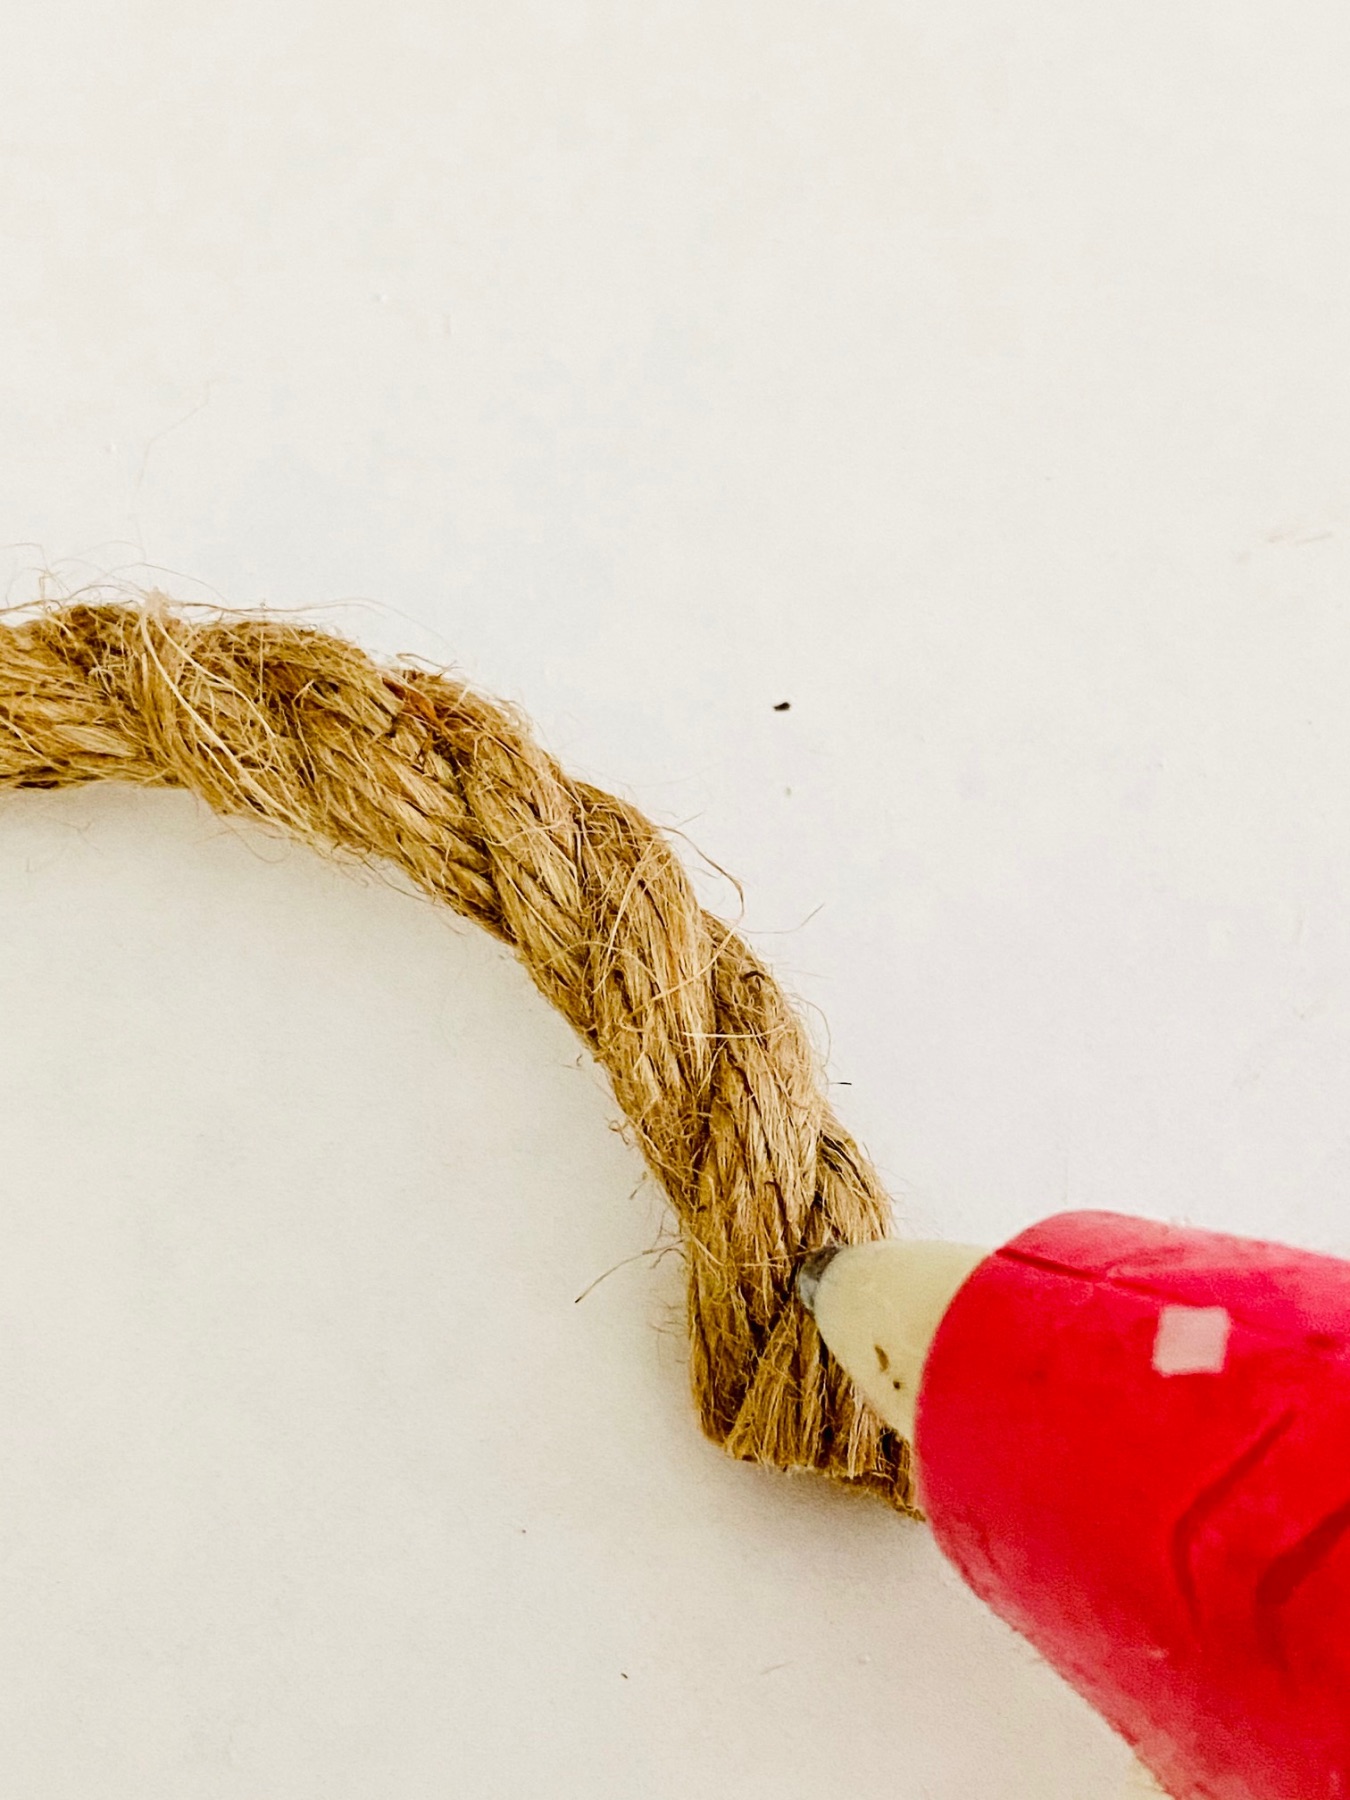 use a hot glue gun to connect the rope